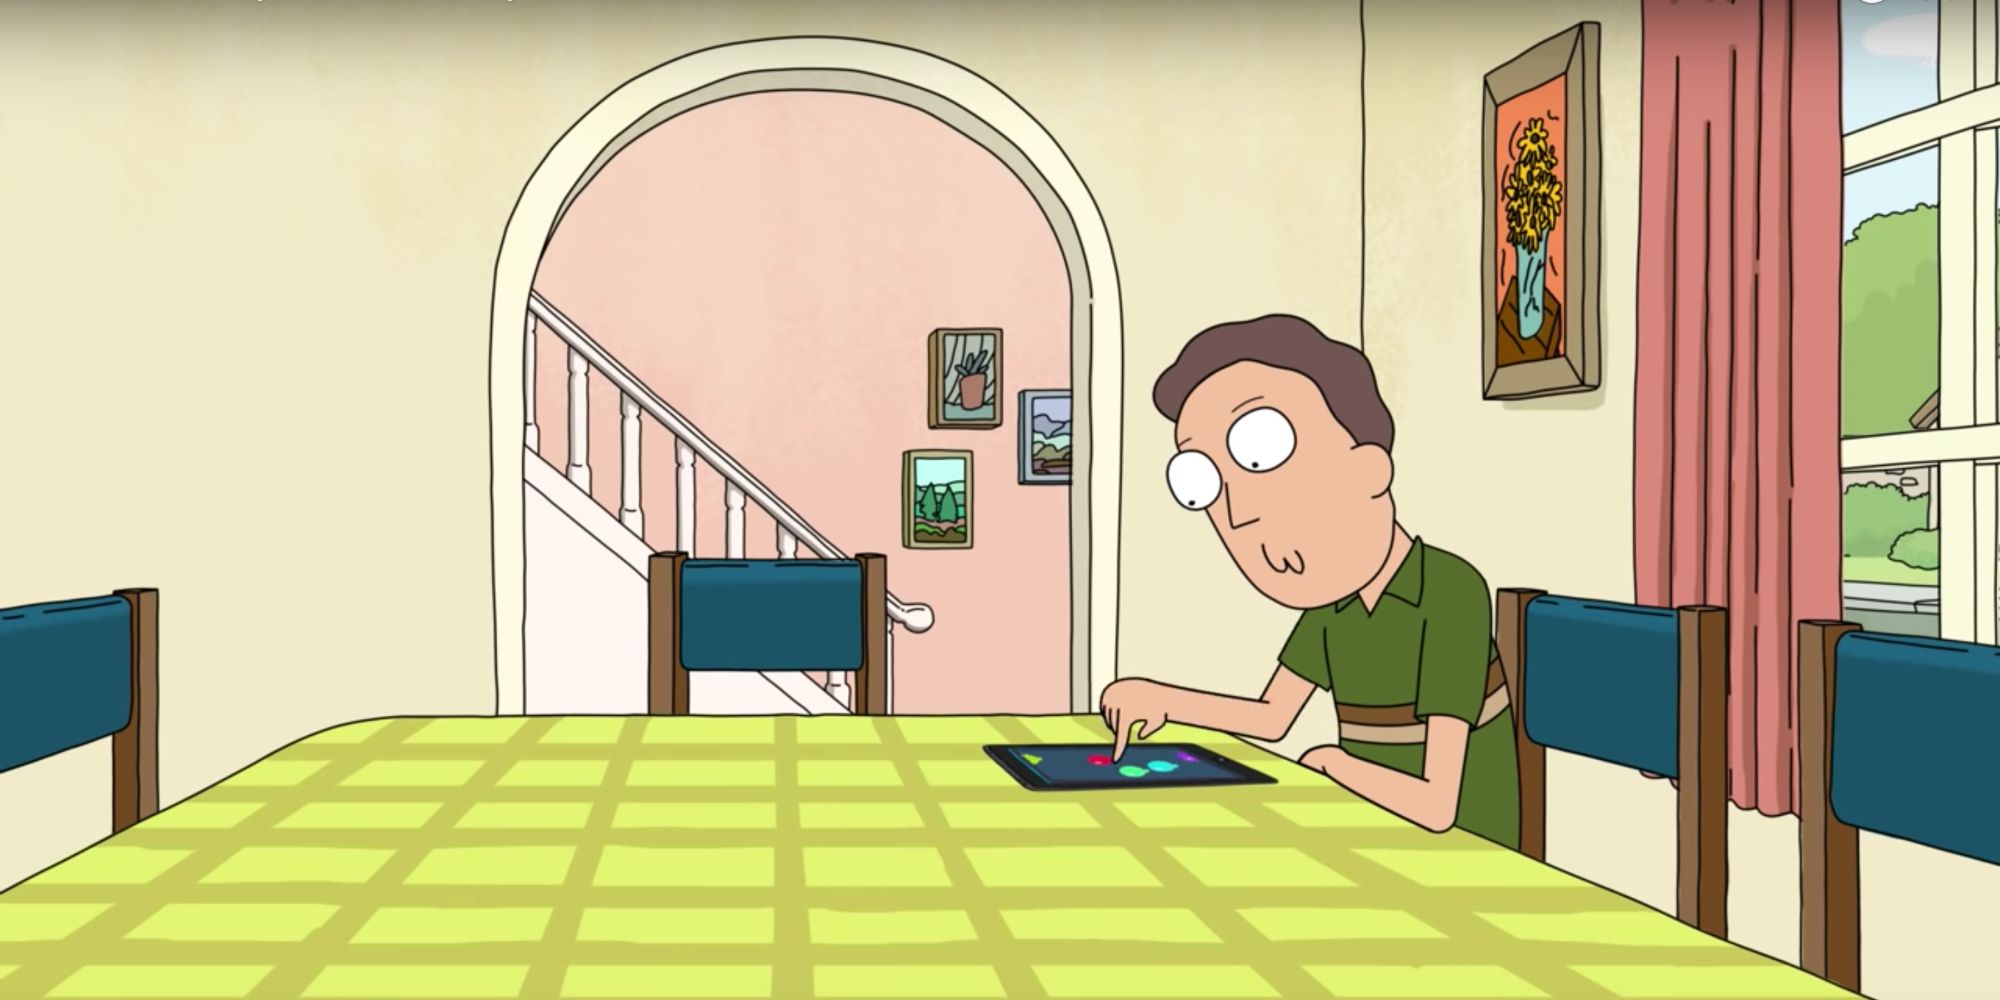 Jerry playing his game at the table alone in Rick and Morty